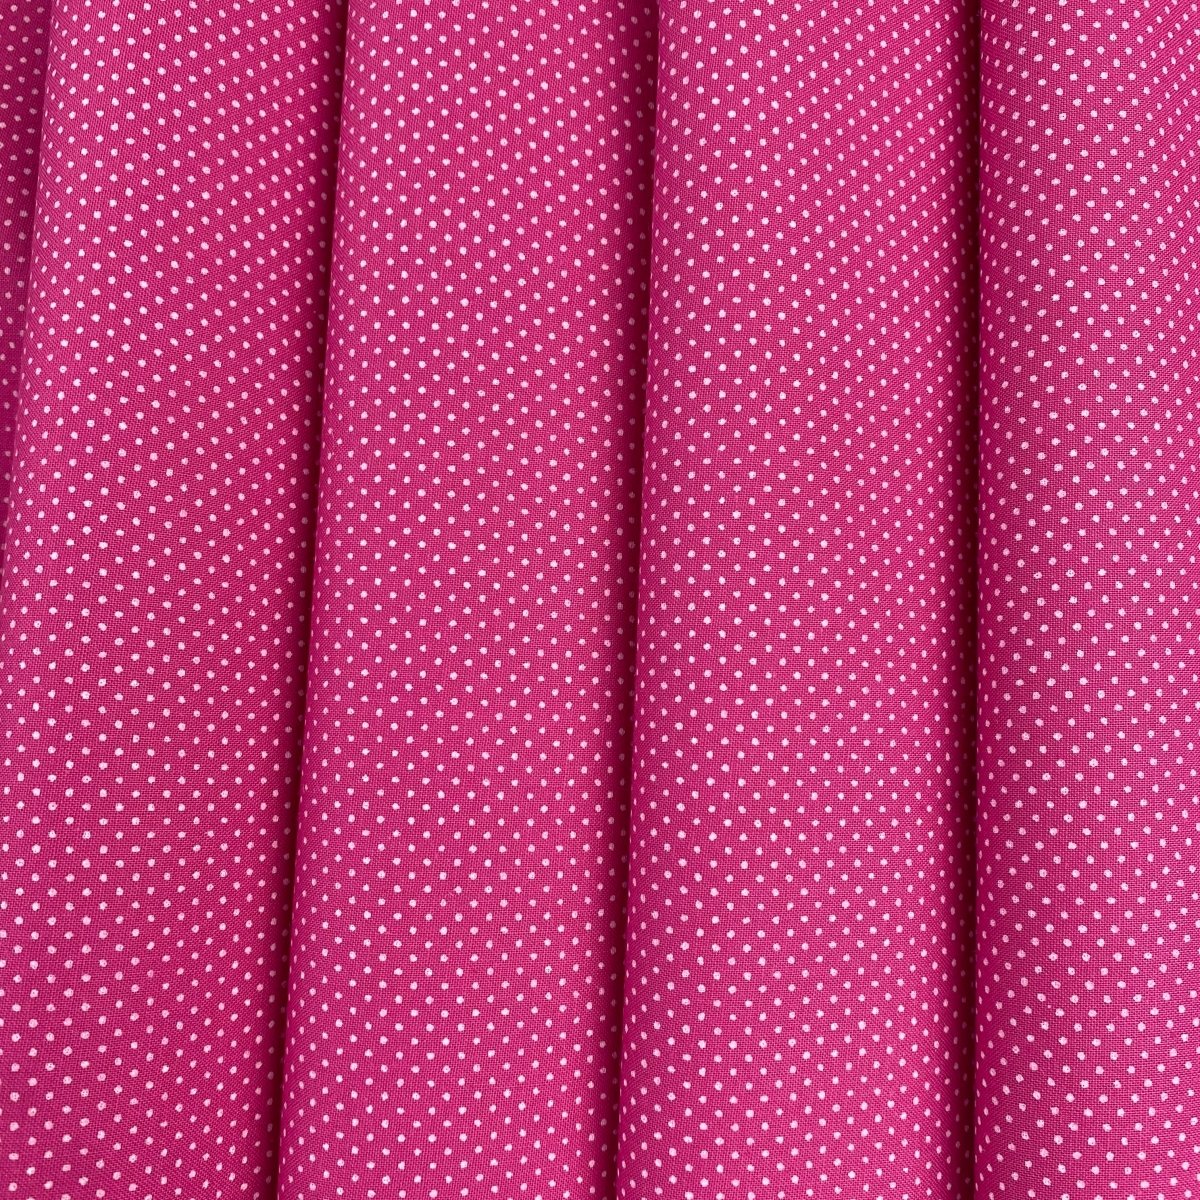 Sew Easy - Micro Dots - Hot Pink - Sewing Gem